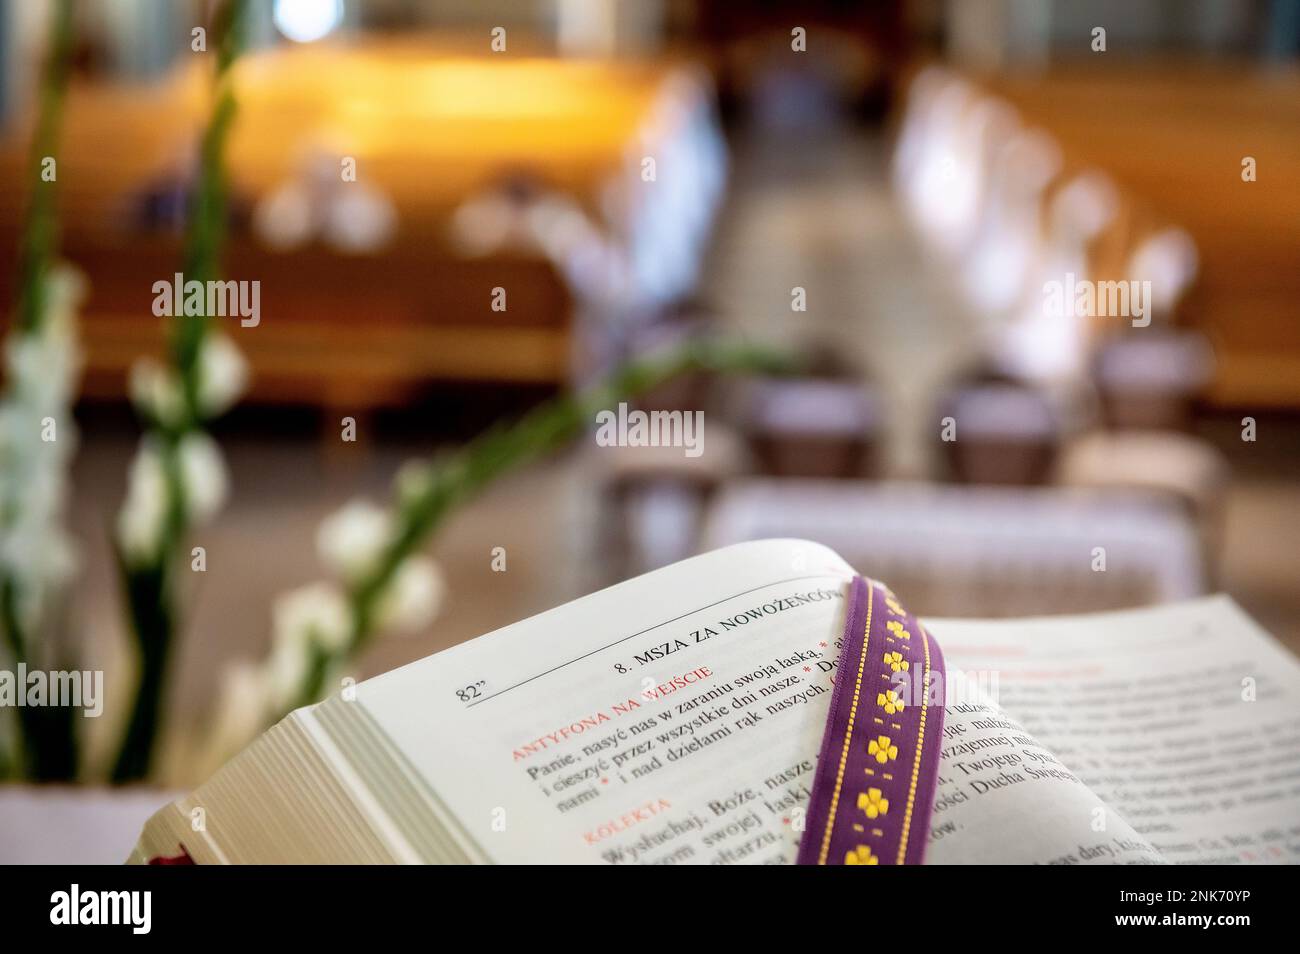 interiors and details in catholic church liturgical book with a church interior blurred in the background Stock Photo